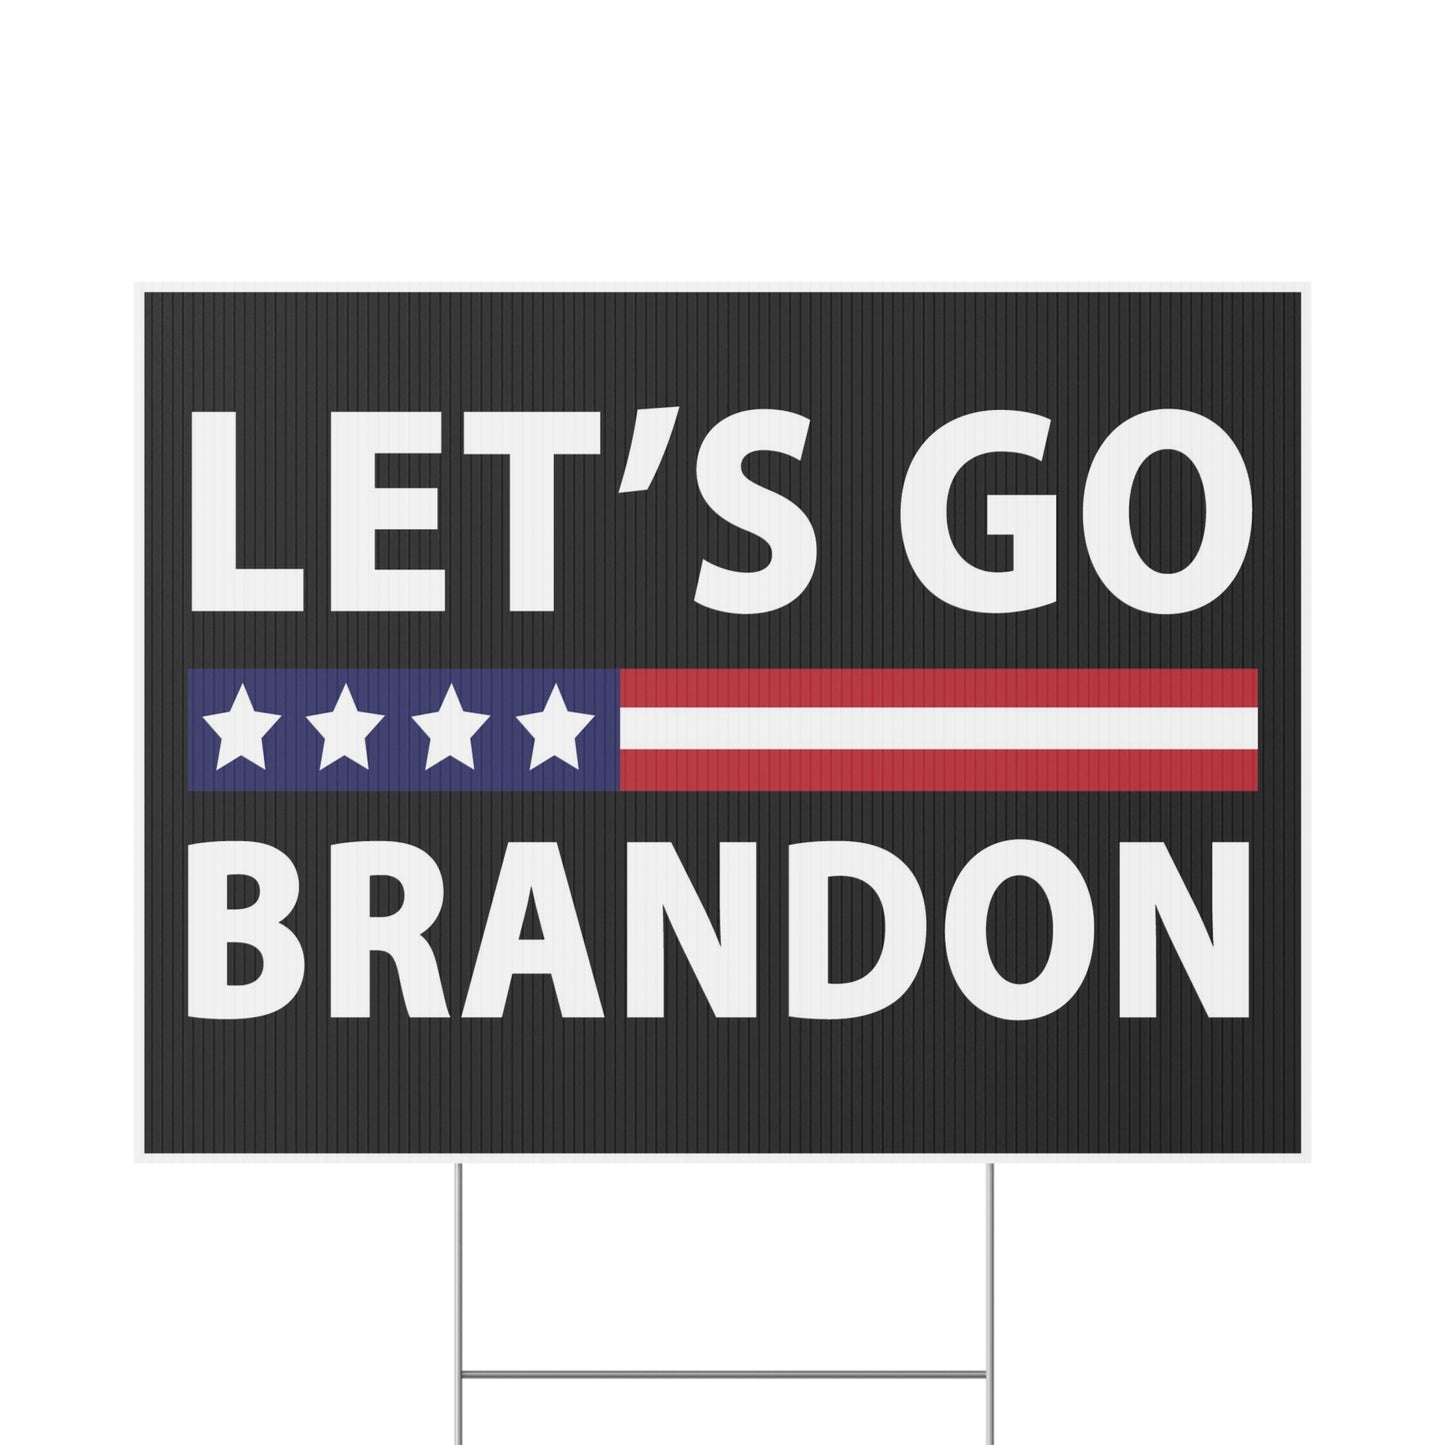 Let's Go Brandon, Yard Sign, Printed 2-Sided 18x12, 24x18 or 36x24, Metal H-Stake Included, v4